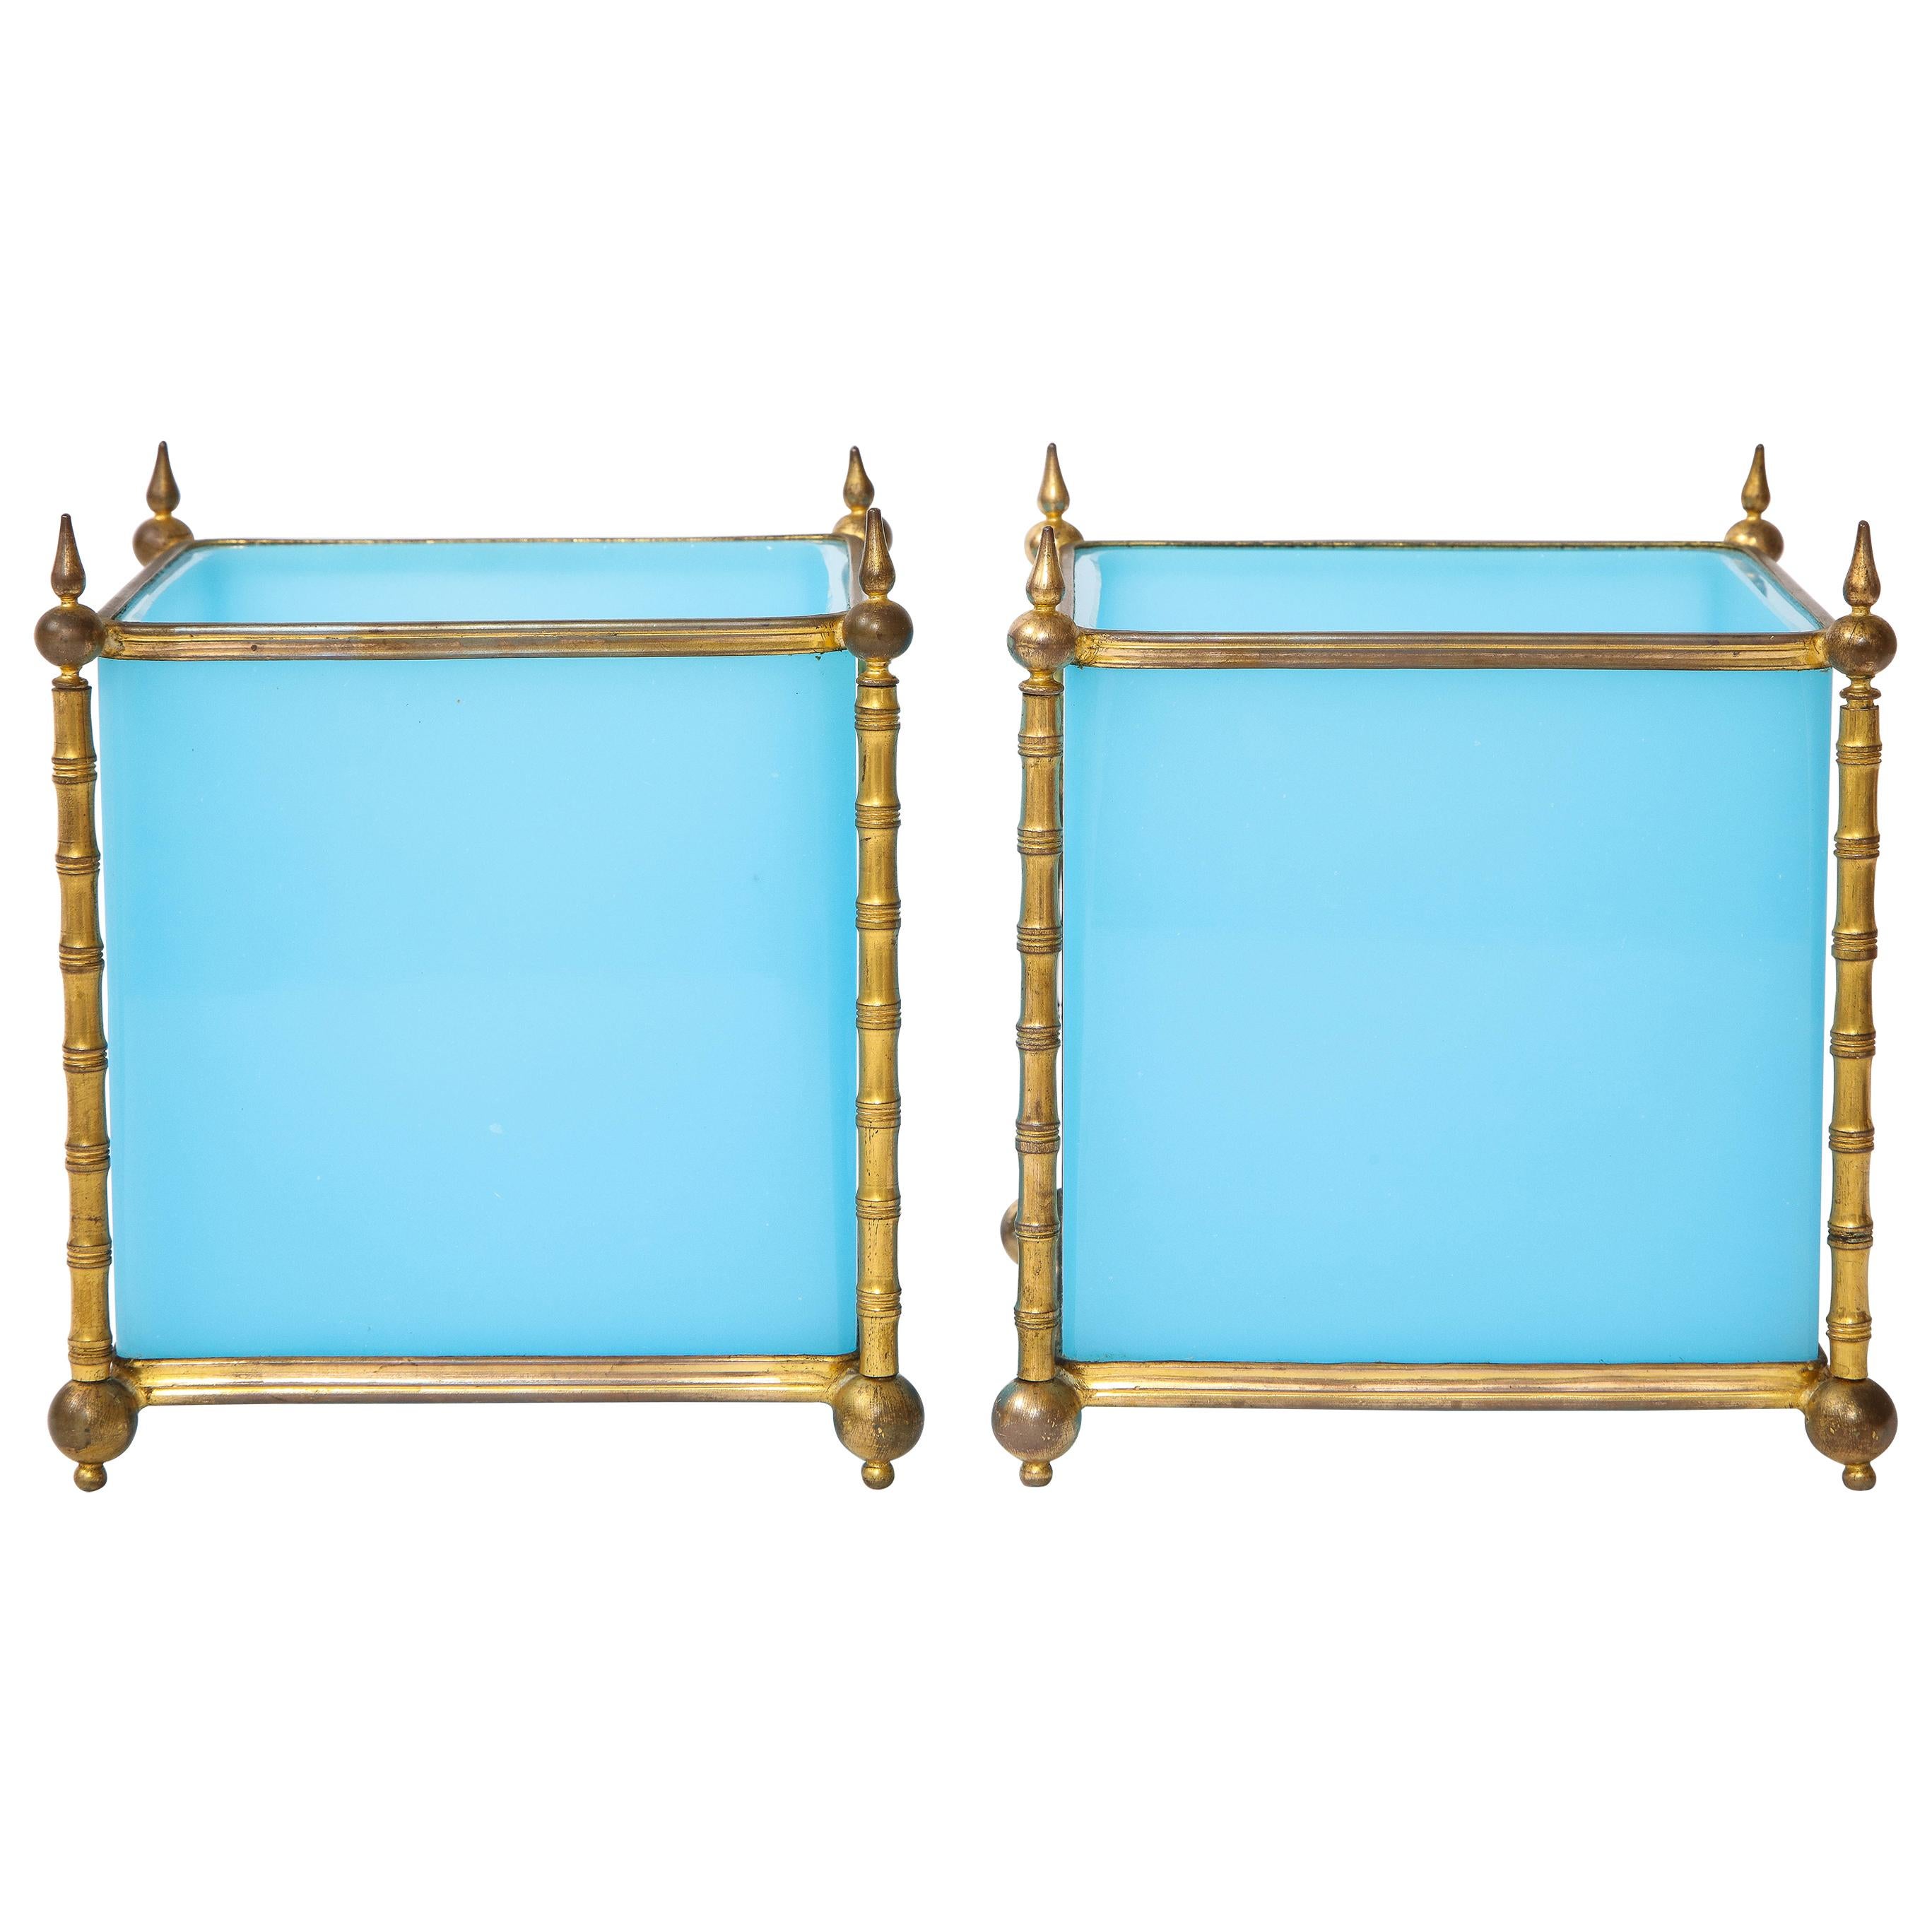 Pair of Turquoise Opaline Baccarat Crystal Ormolu Mounted Jardinière/Cache Pots